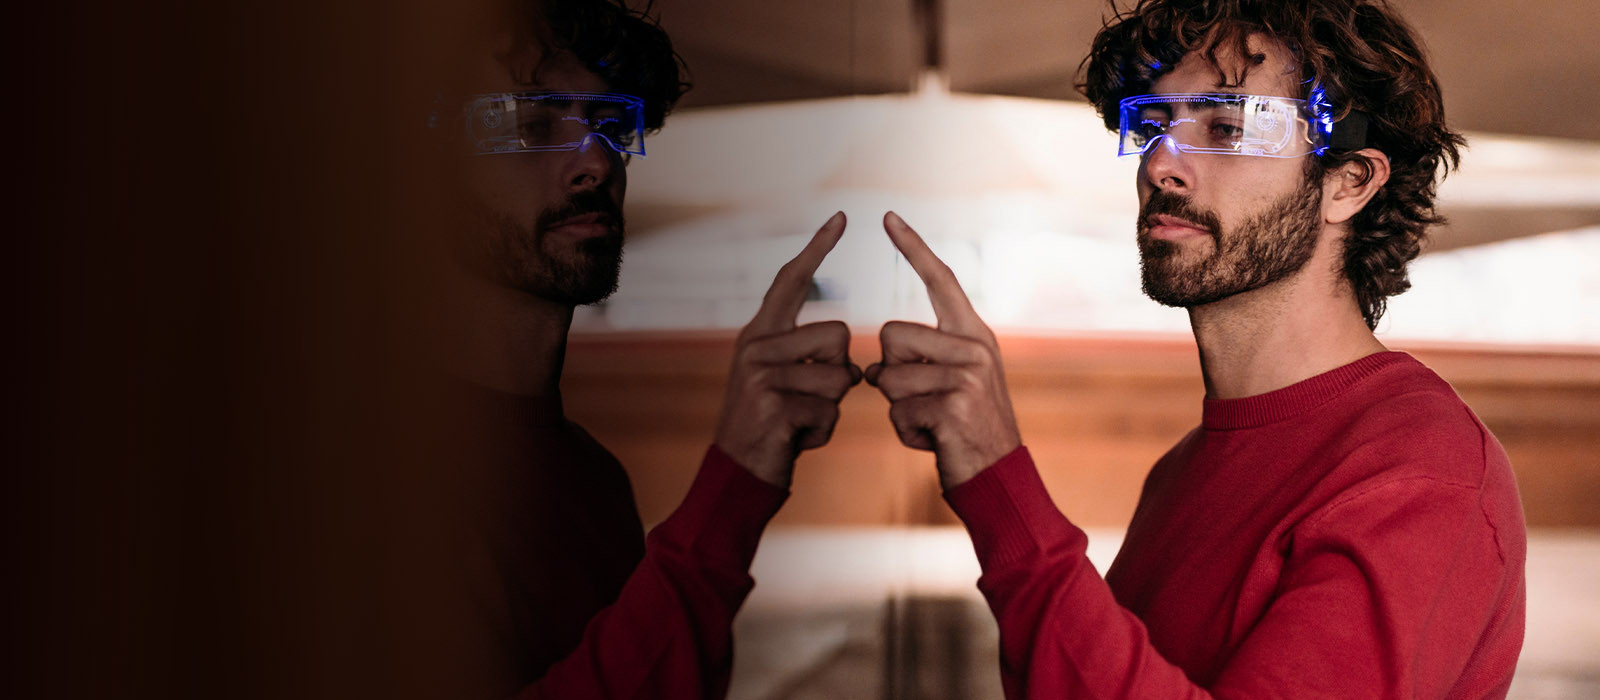 man wearing digital glasses pointing at a mirror